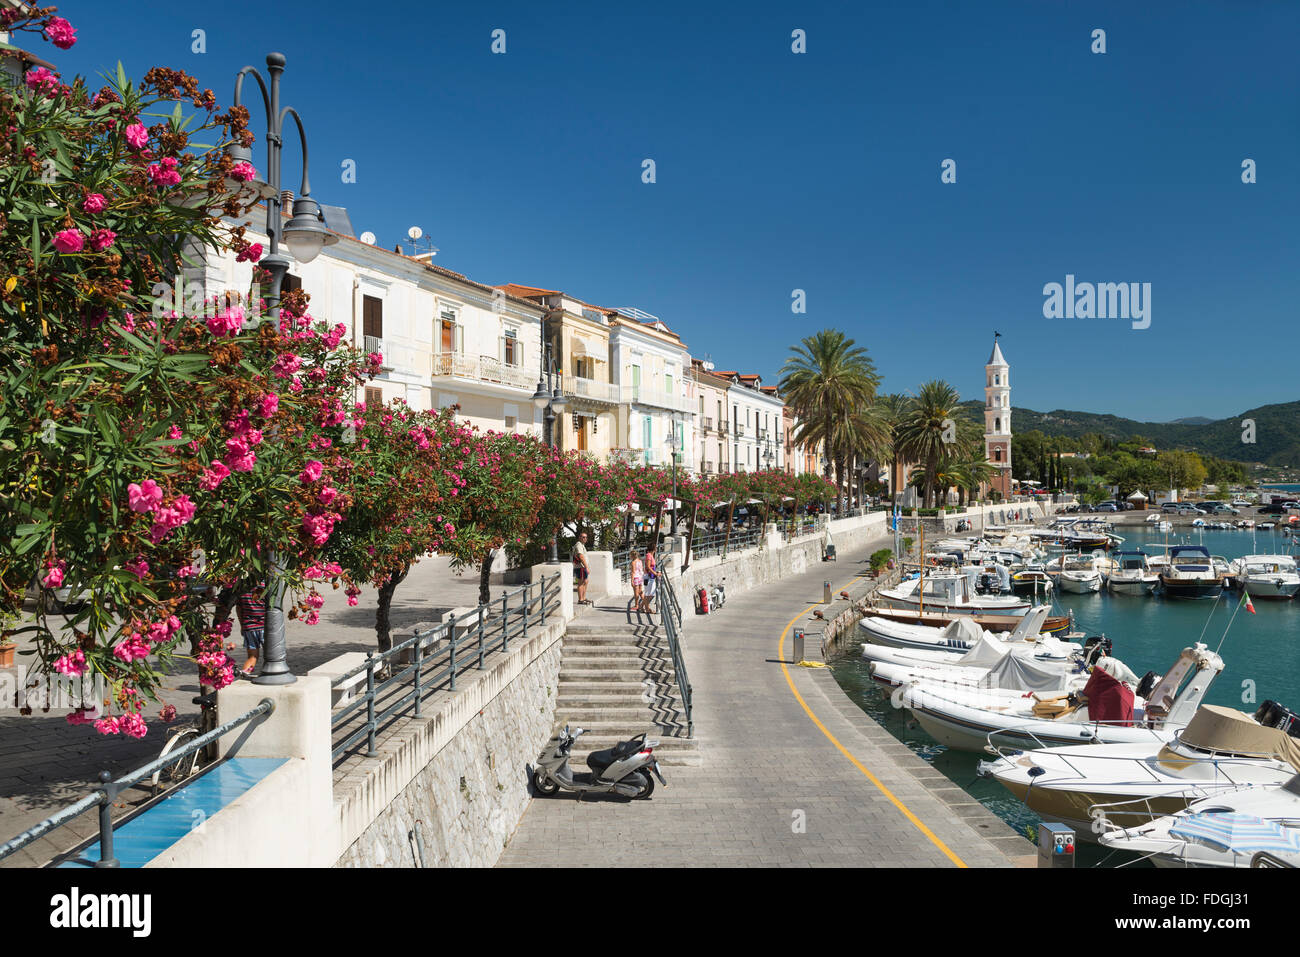 Blooming Oleander on the harbor promenade in picturesque Scario on the Mediterranean coast of Cilento, Campania, Italy Stock Photo